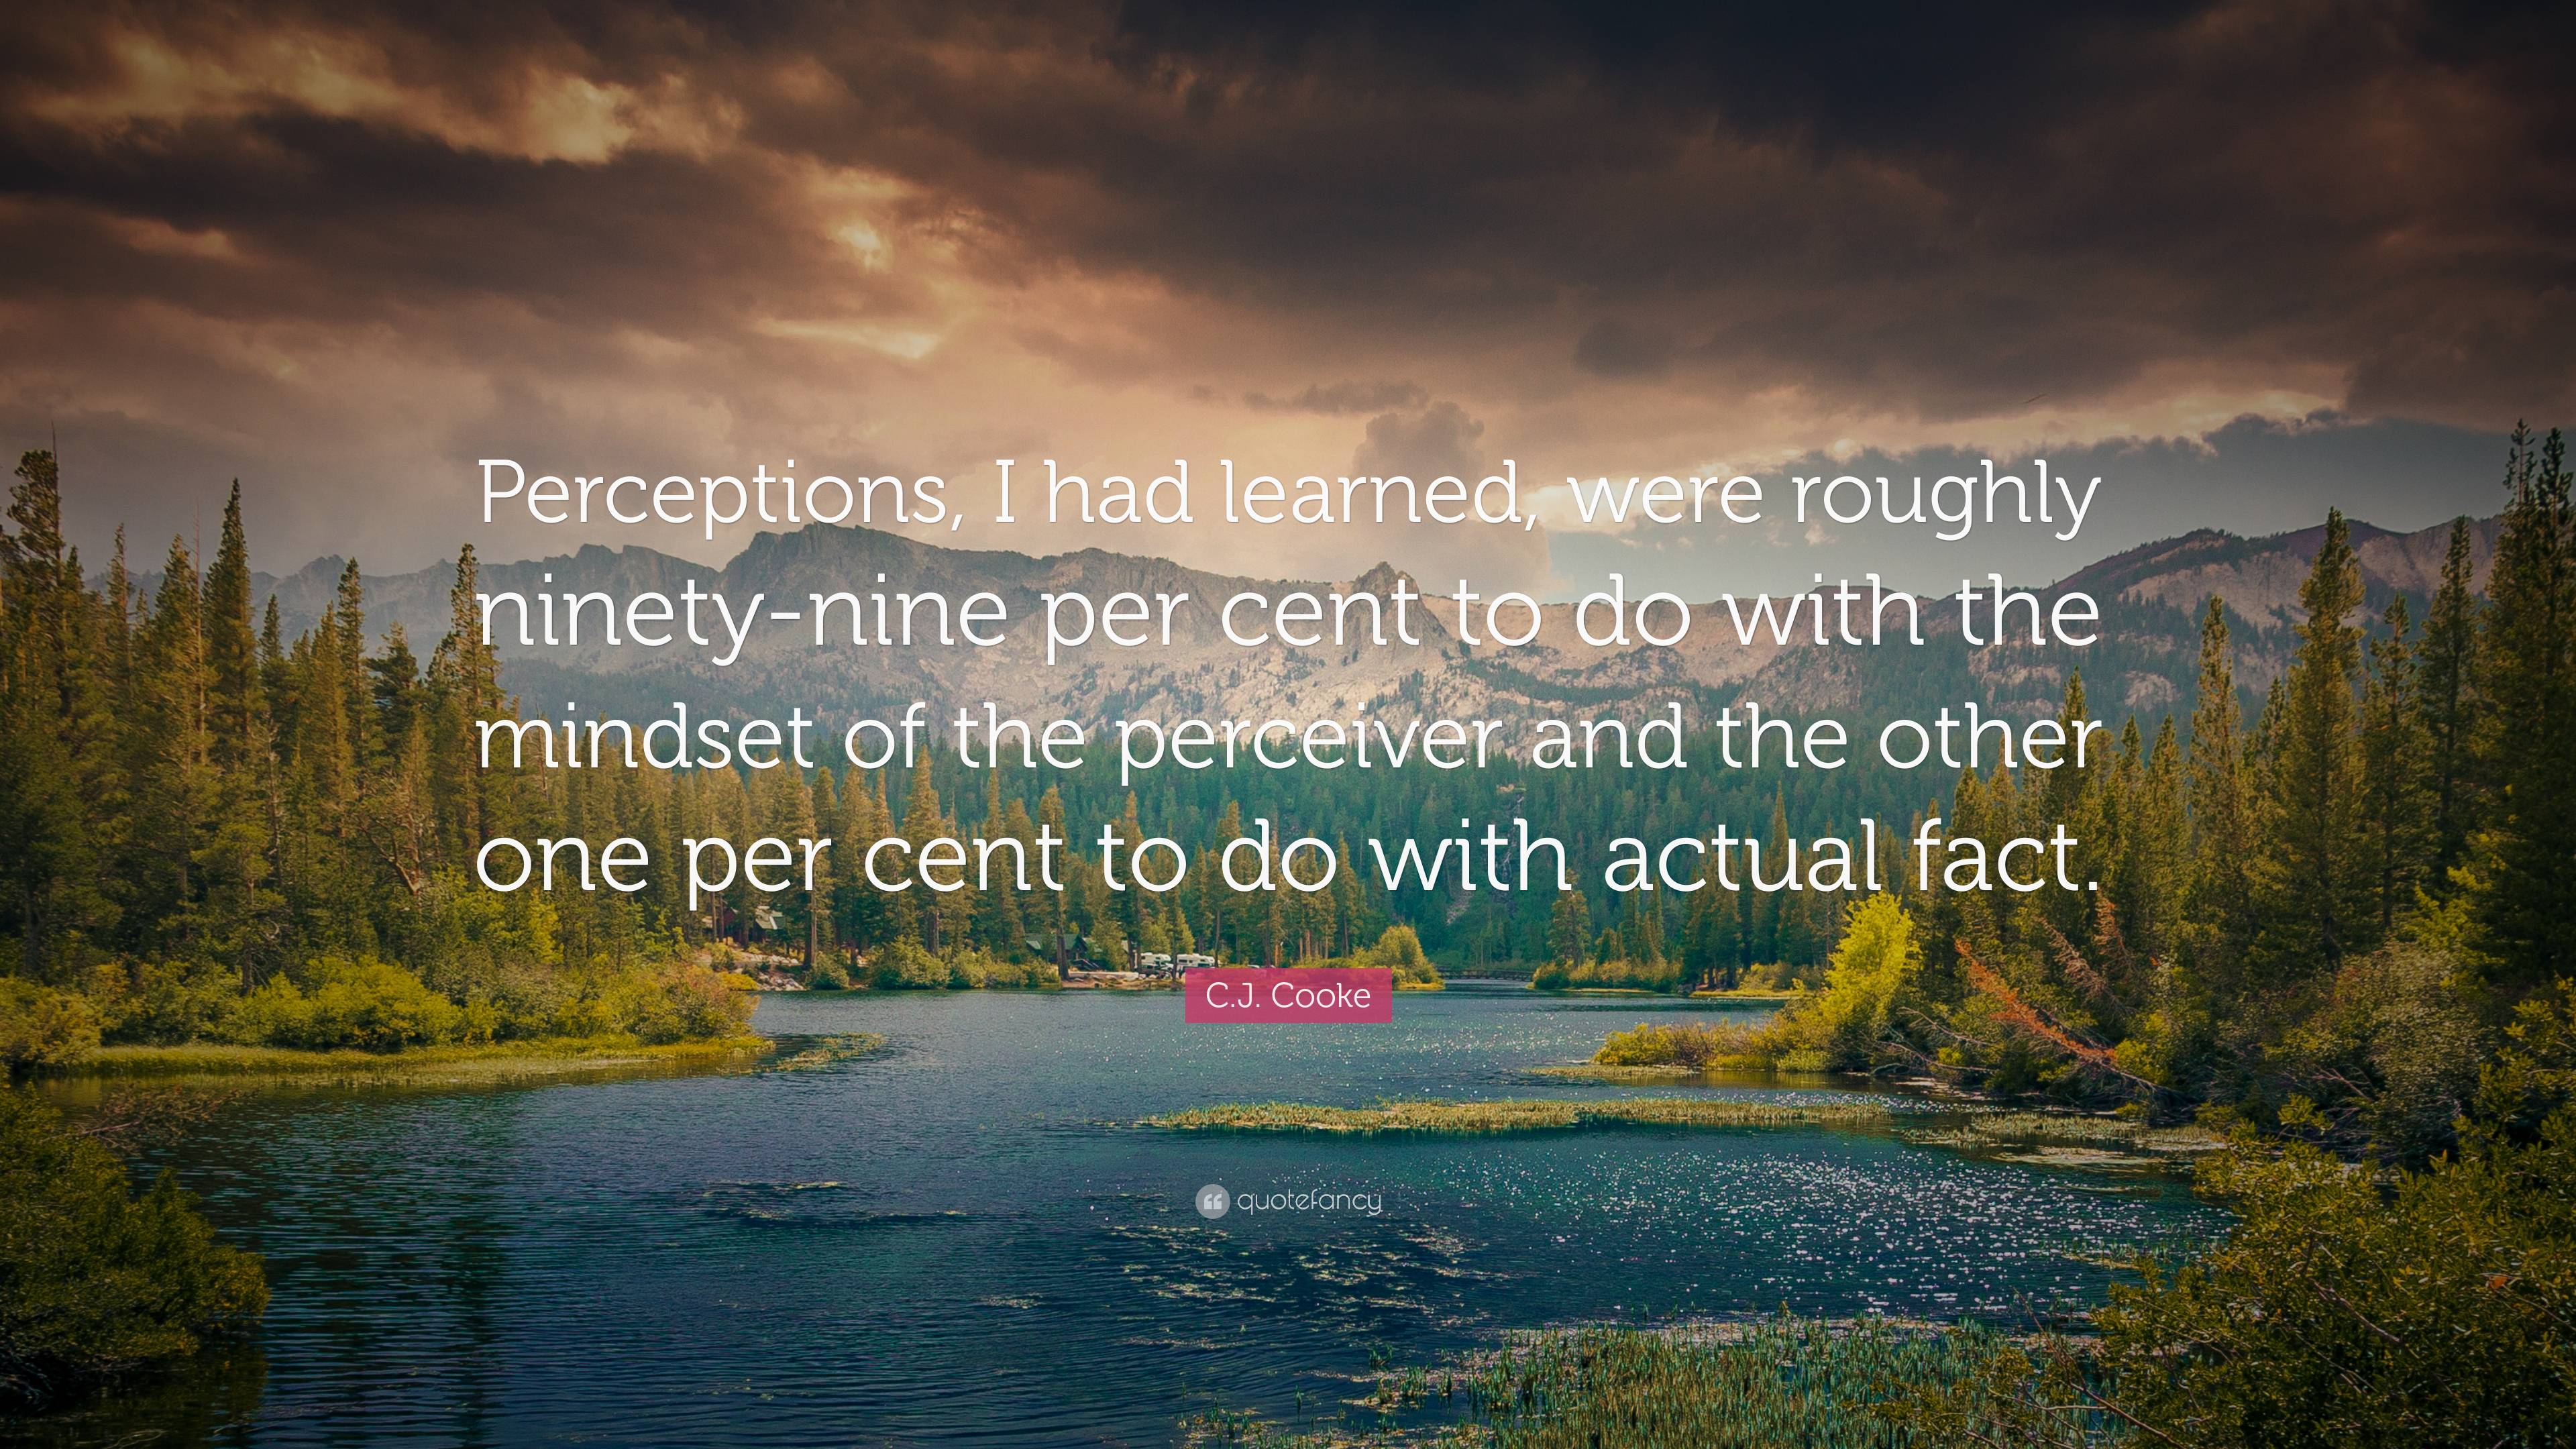 C.J. Cooke Quote: “Perceptions, I had learned, were roughly ninety-nine ...